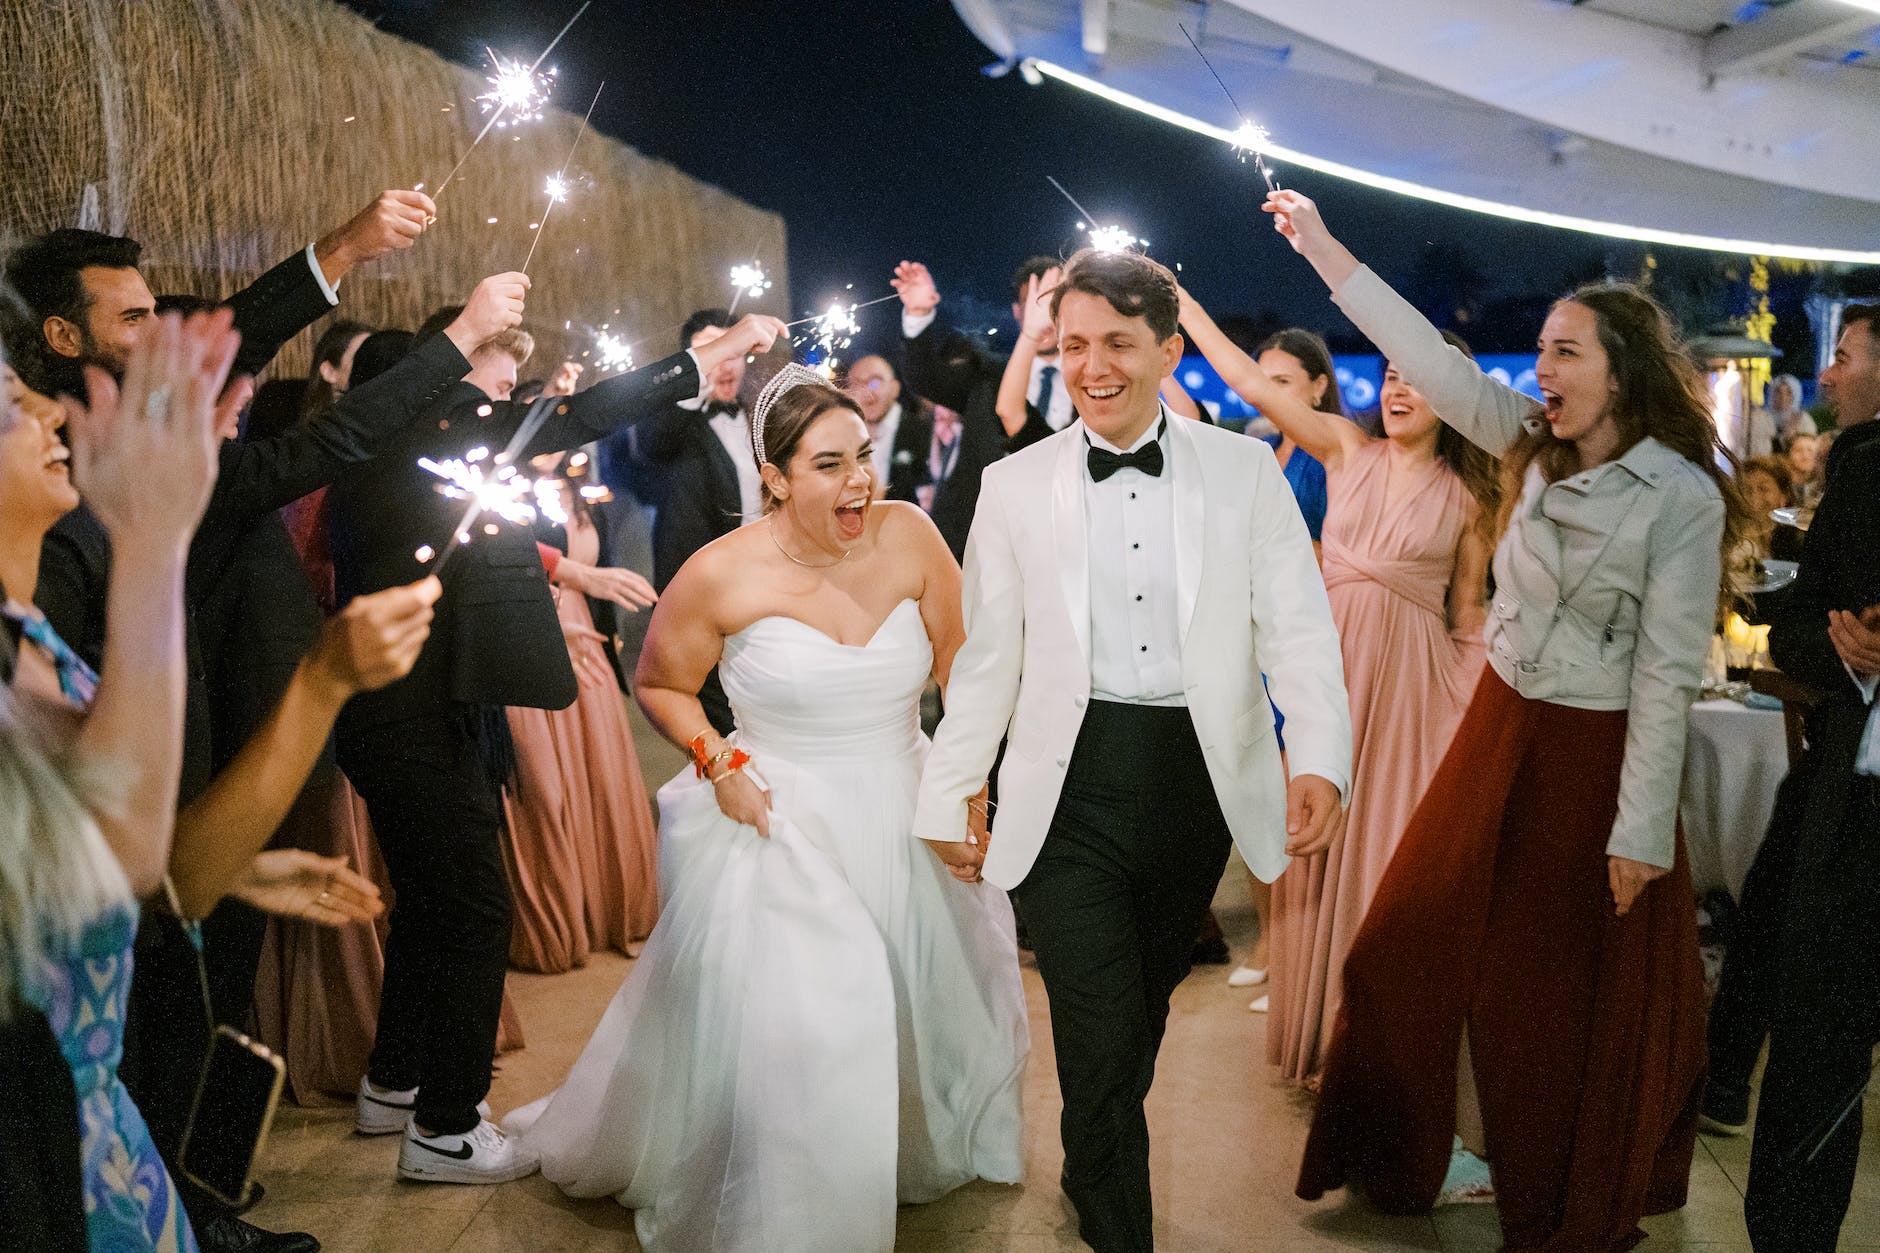 newlyweds walking under people holding sparklers in raised arms